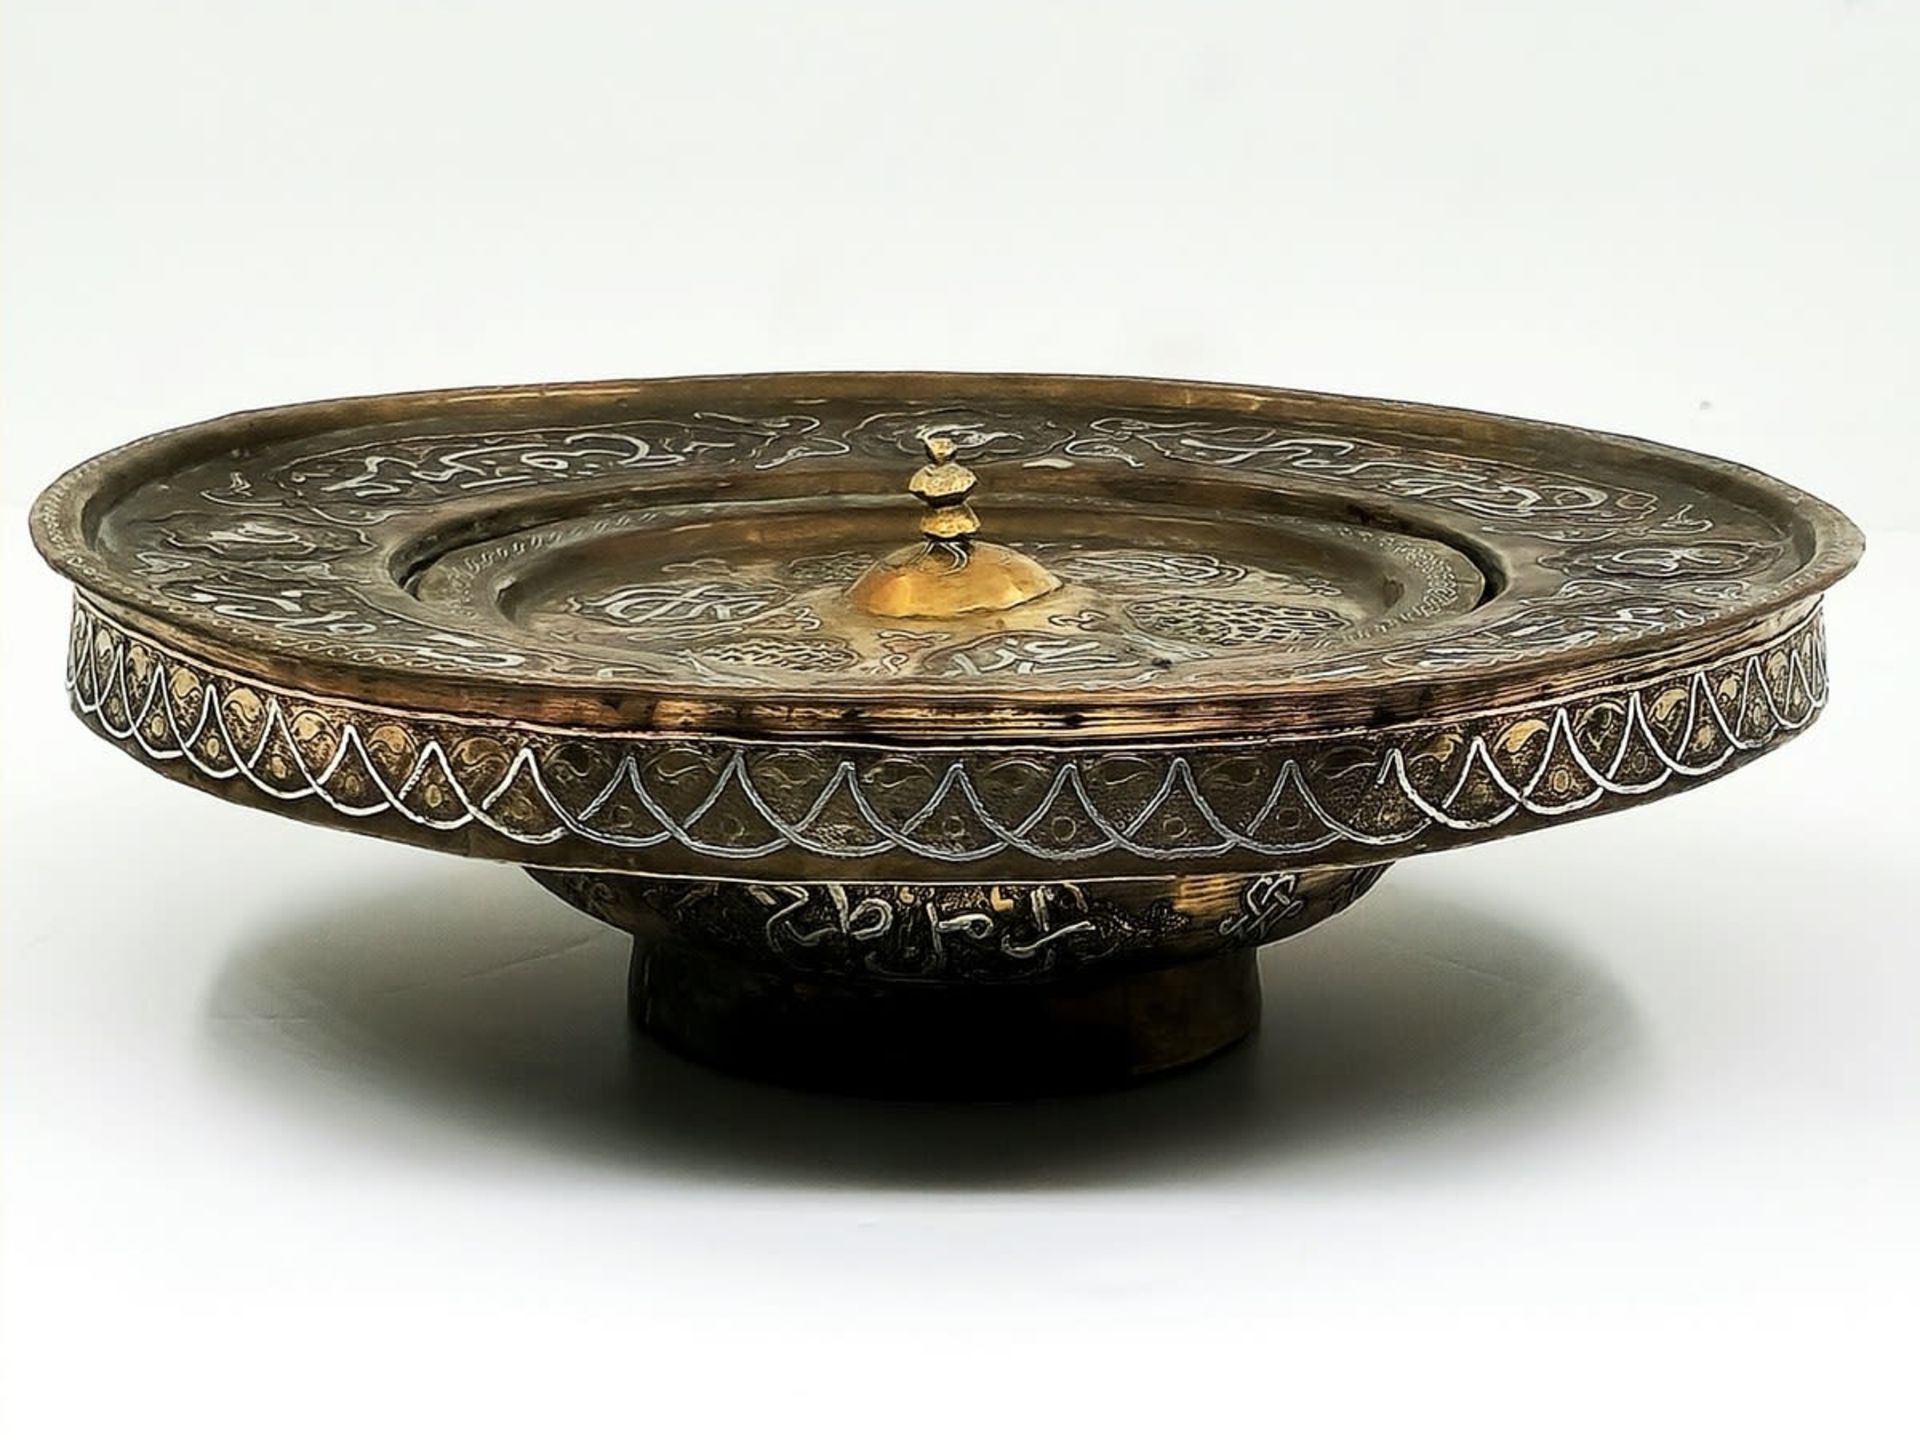 Islamic Aftaba with matching basin and strainer, decorated with Damascus work (inlay of copper and - Image 4 of 11